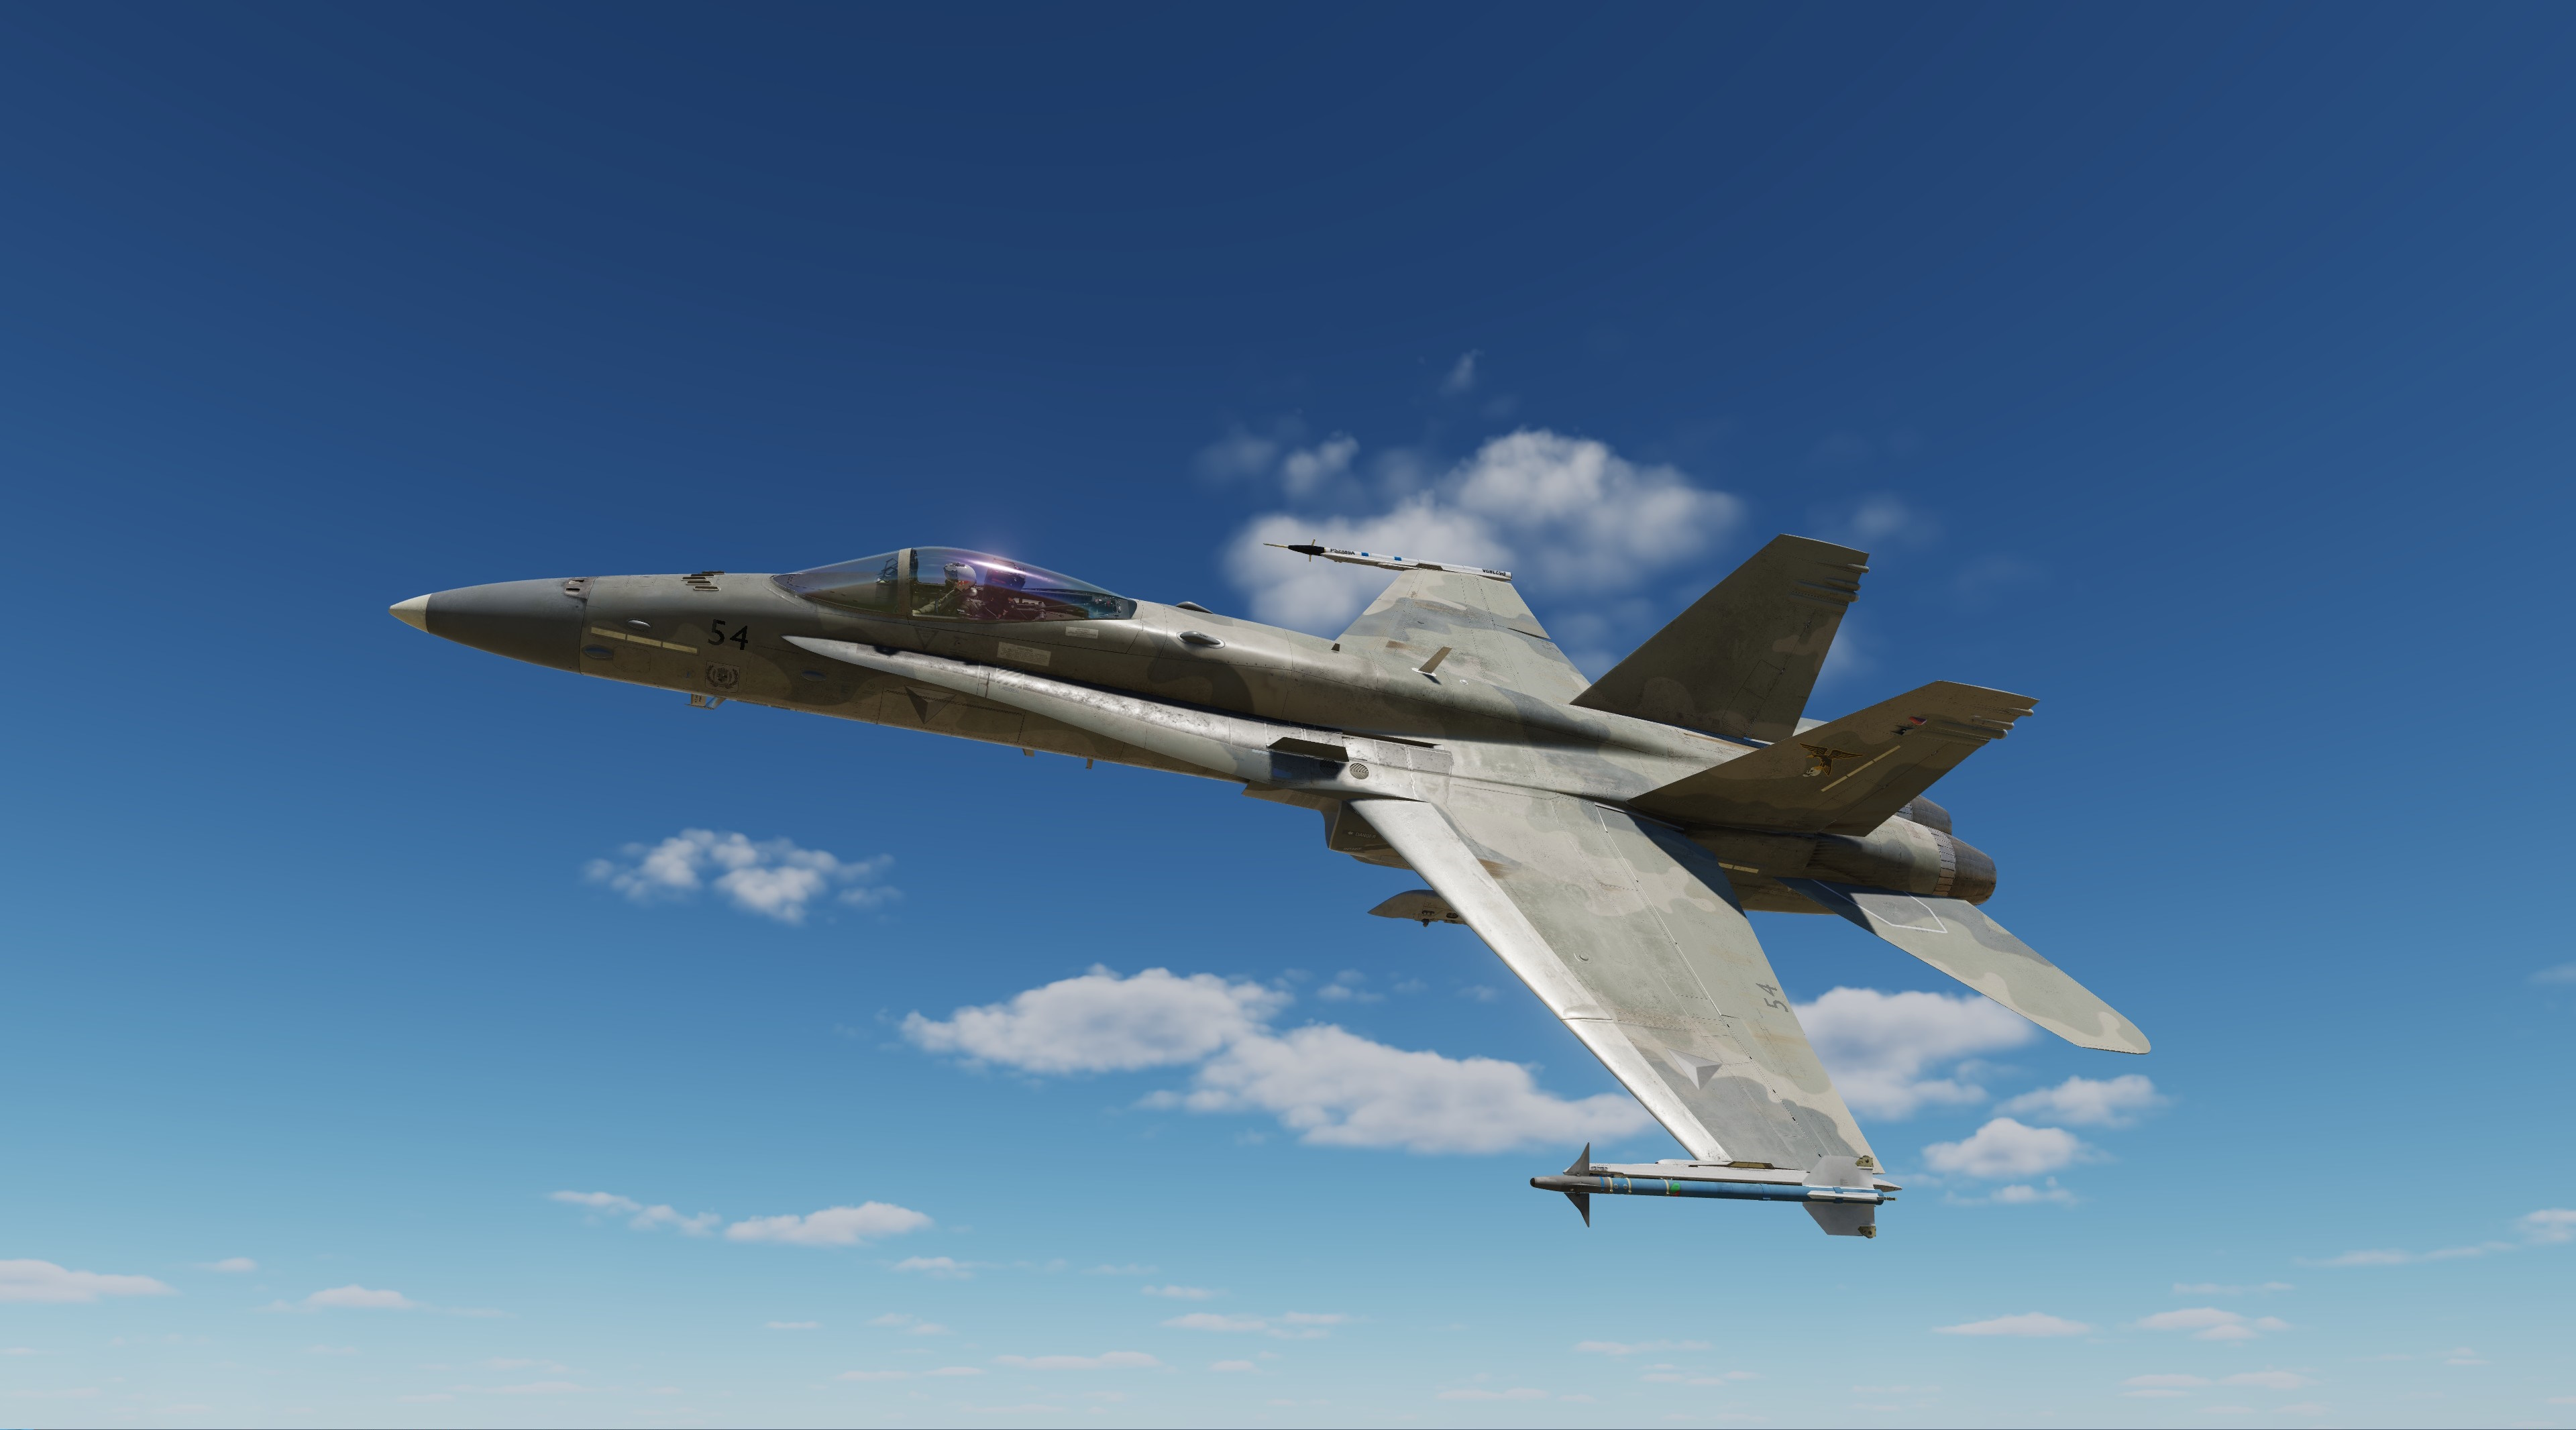 ACE COMBAT - F-18C - Nordennavic Royal Air Force - Sqn "Vosges" V1.1 SPA 91 only -Dirty-